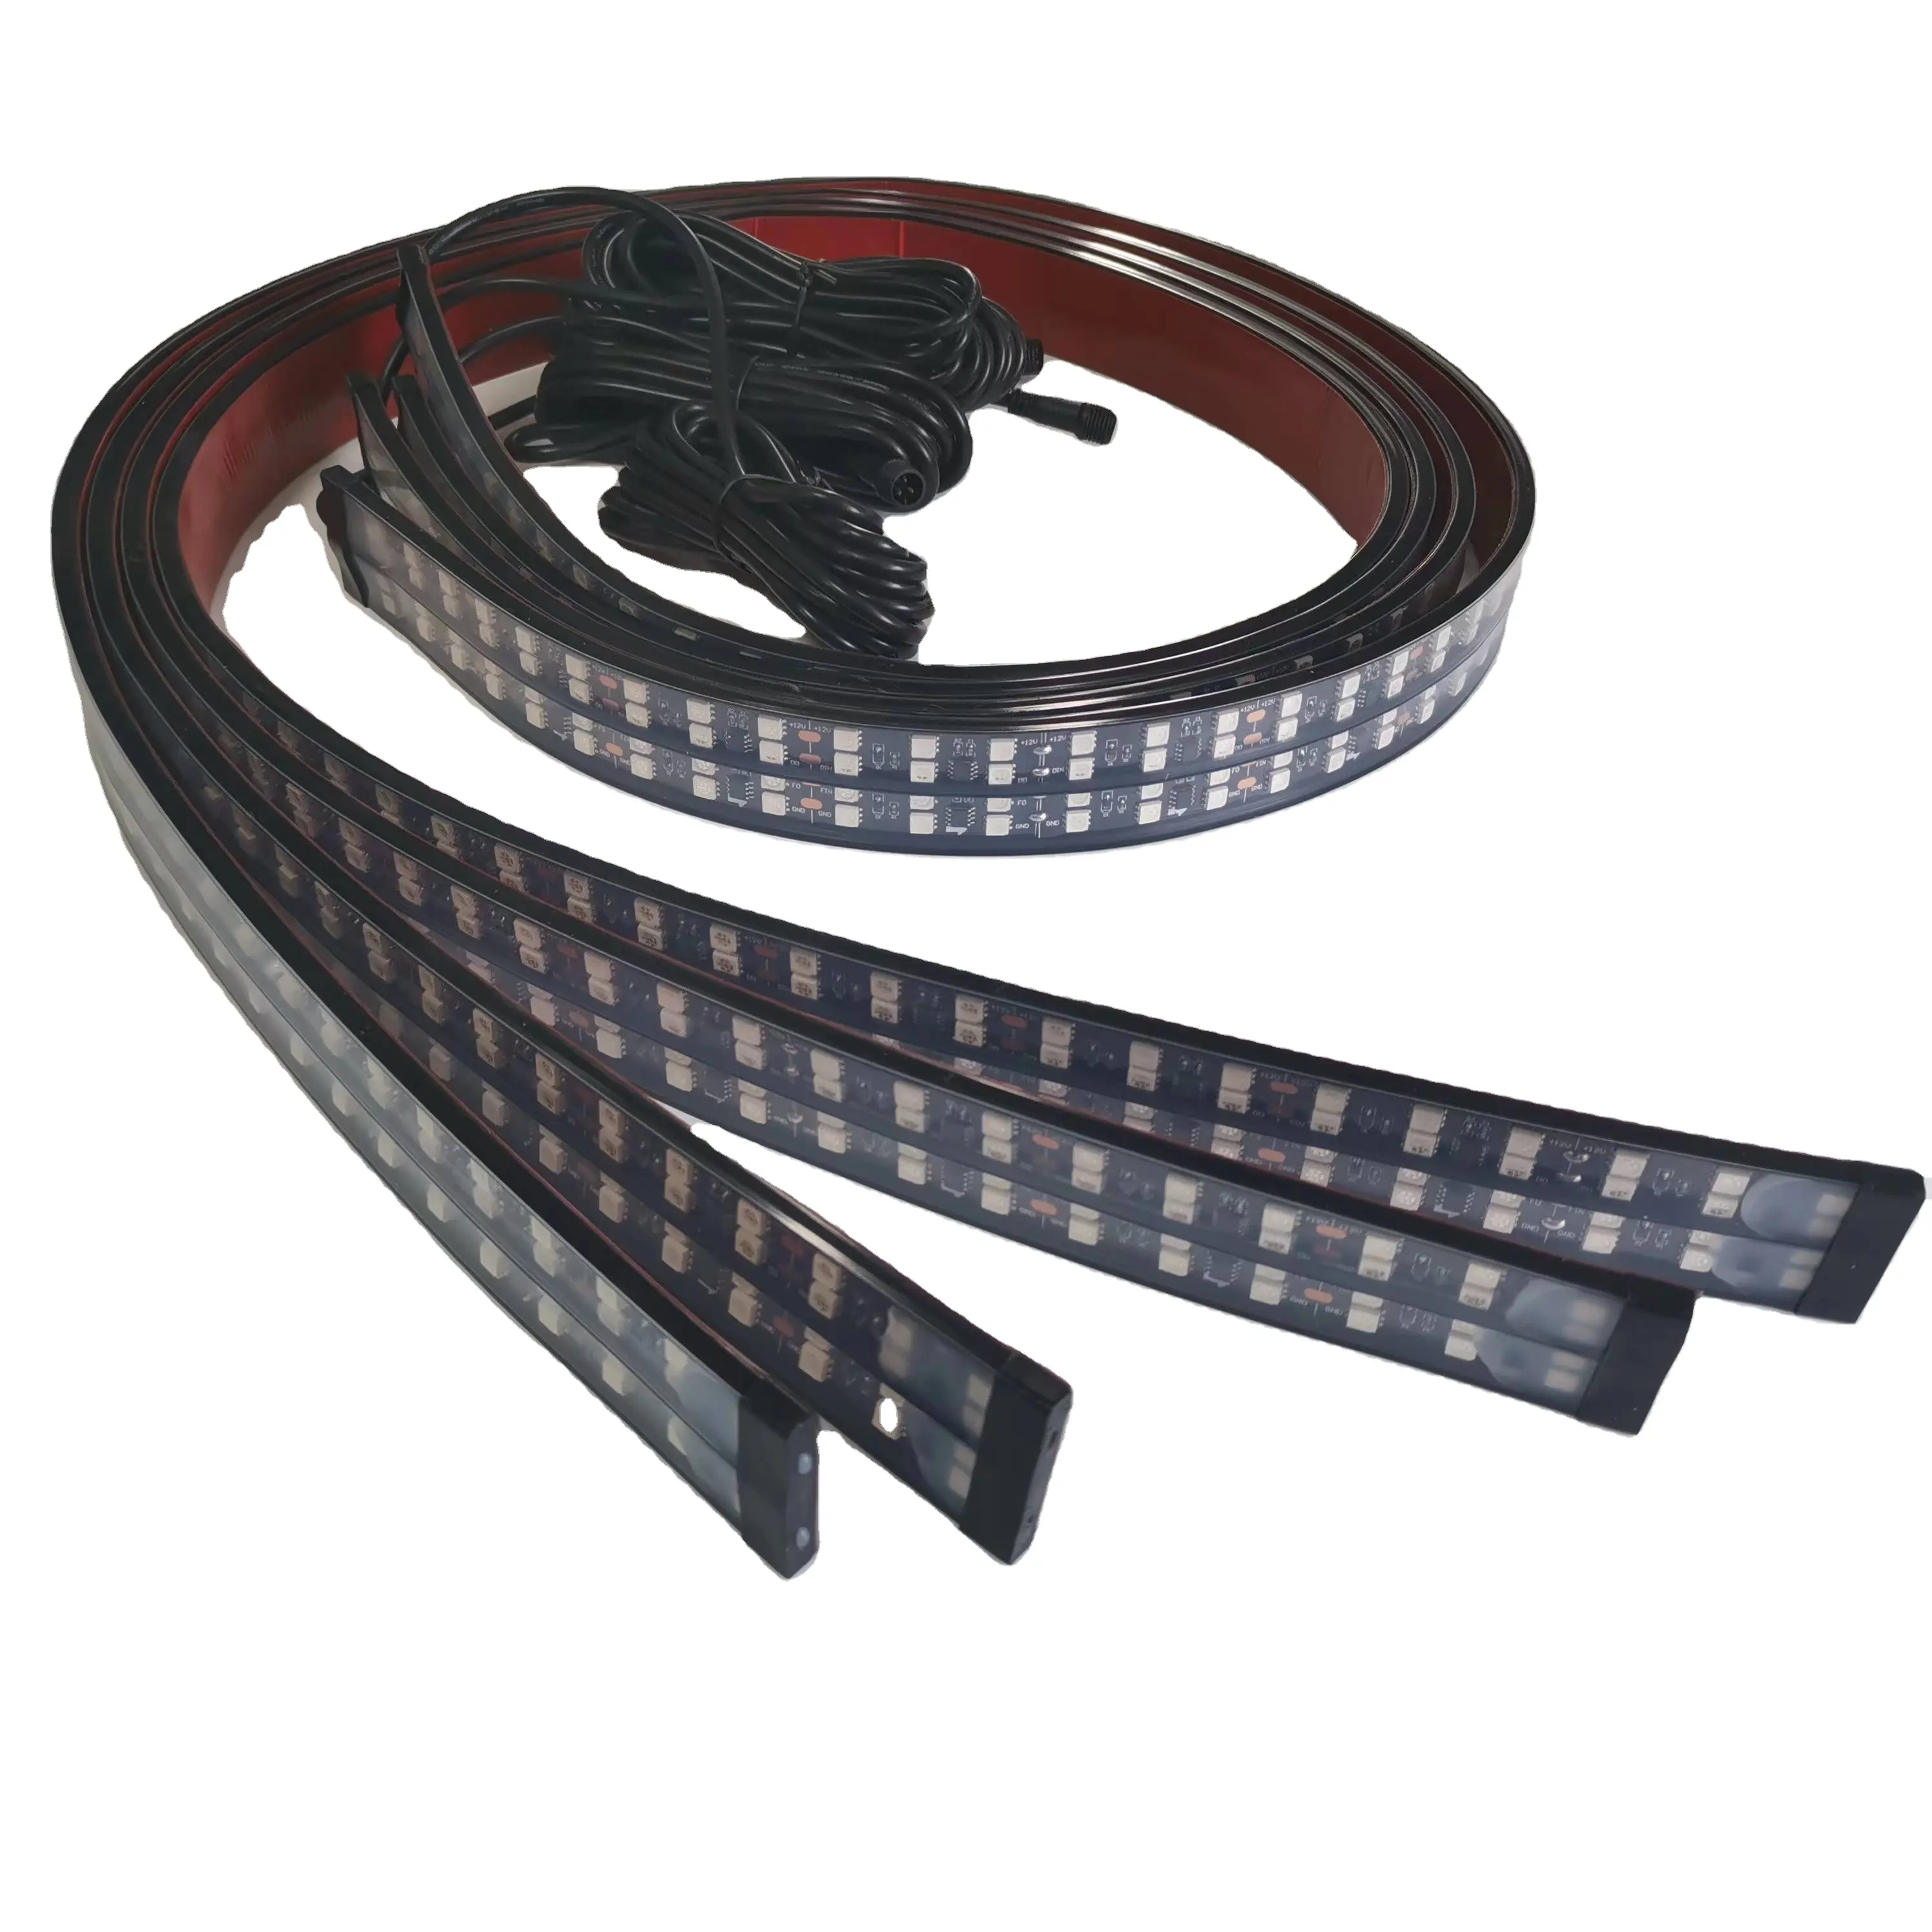 KingShowStar Quad Row Led Light Bar 6 12 24 36 48 60 Inch Car accessories RGB dream color LED light strips with connector